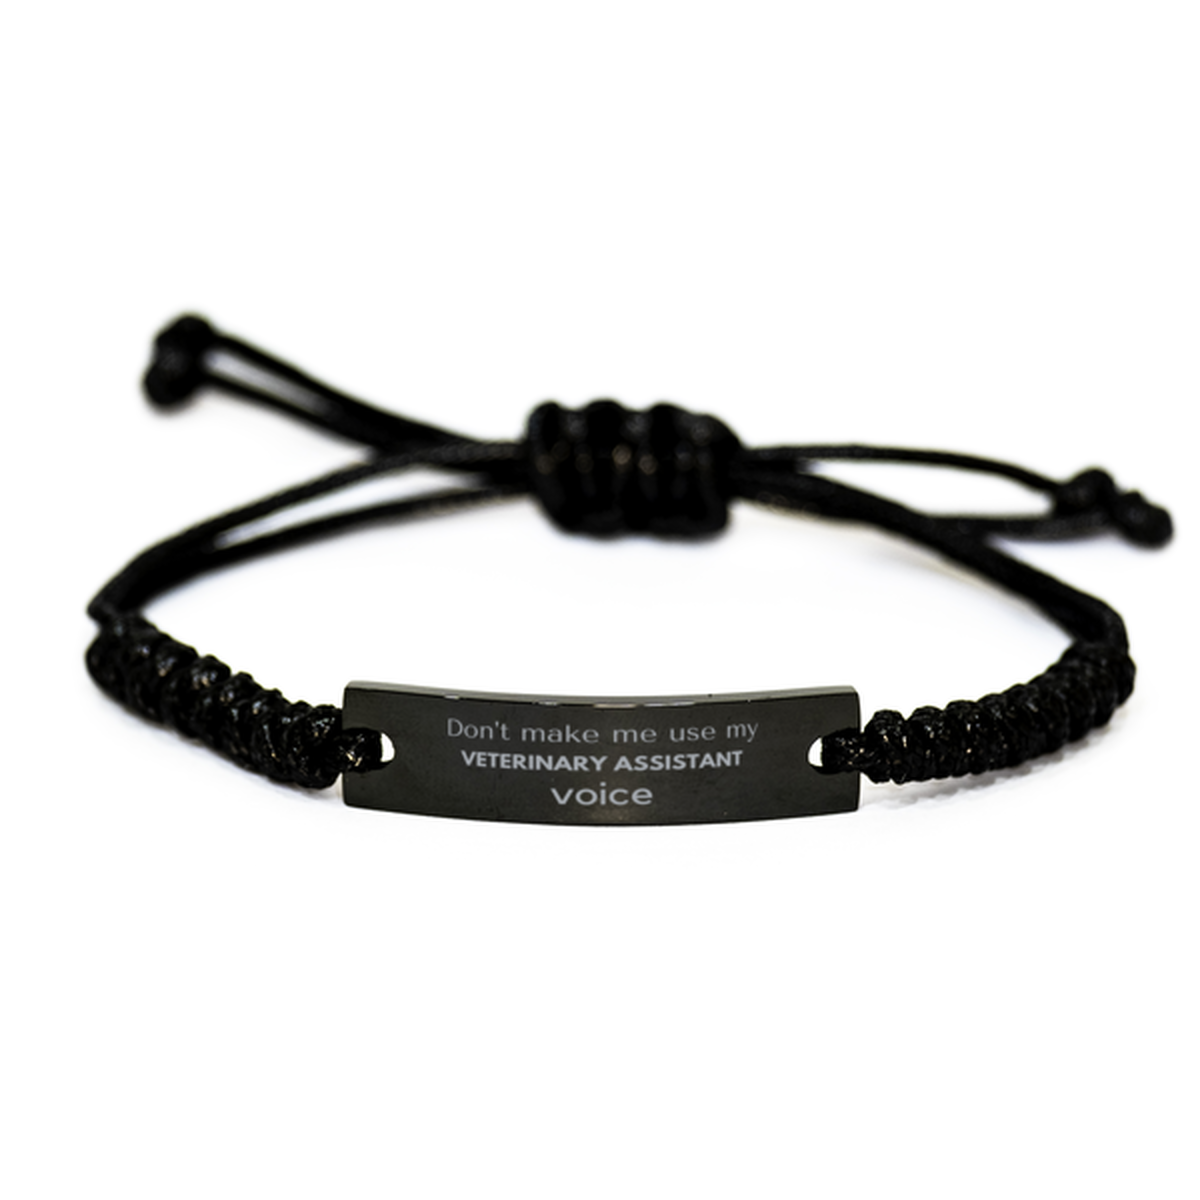 Don't make me use my Veterinary Assistant voice, Sarcasm Veterinary Assistant Gifts, Christmas Veterinary Assistant Black Rope Bracelet Birthday Unique Gifts For Veterinary Assistant Coworkers, Men, Women, Colleague, Friends